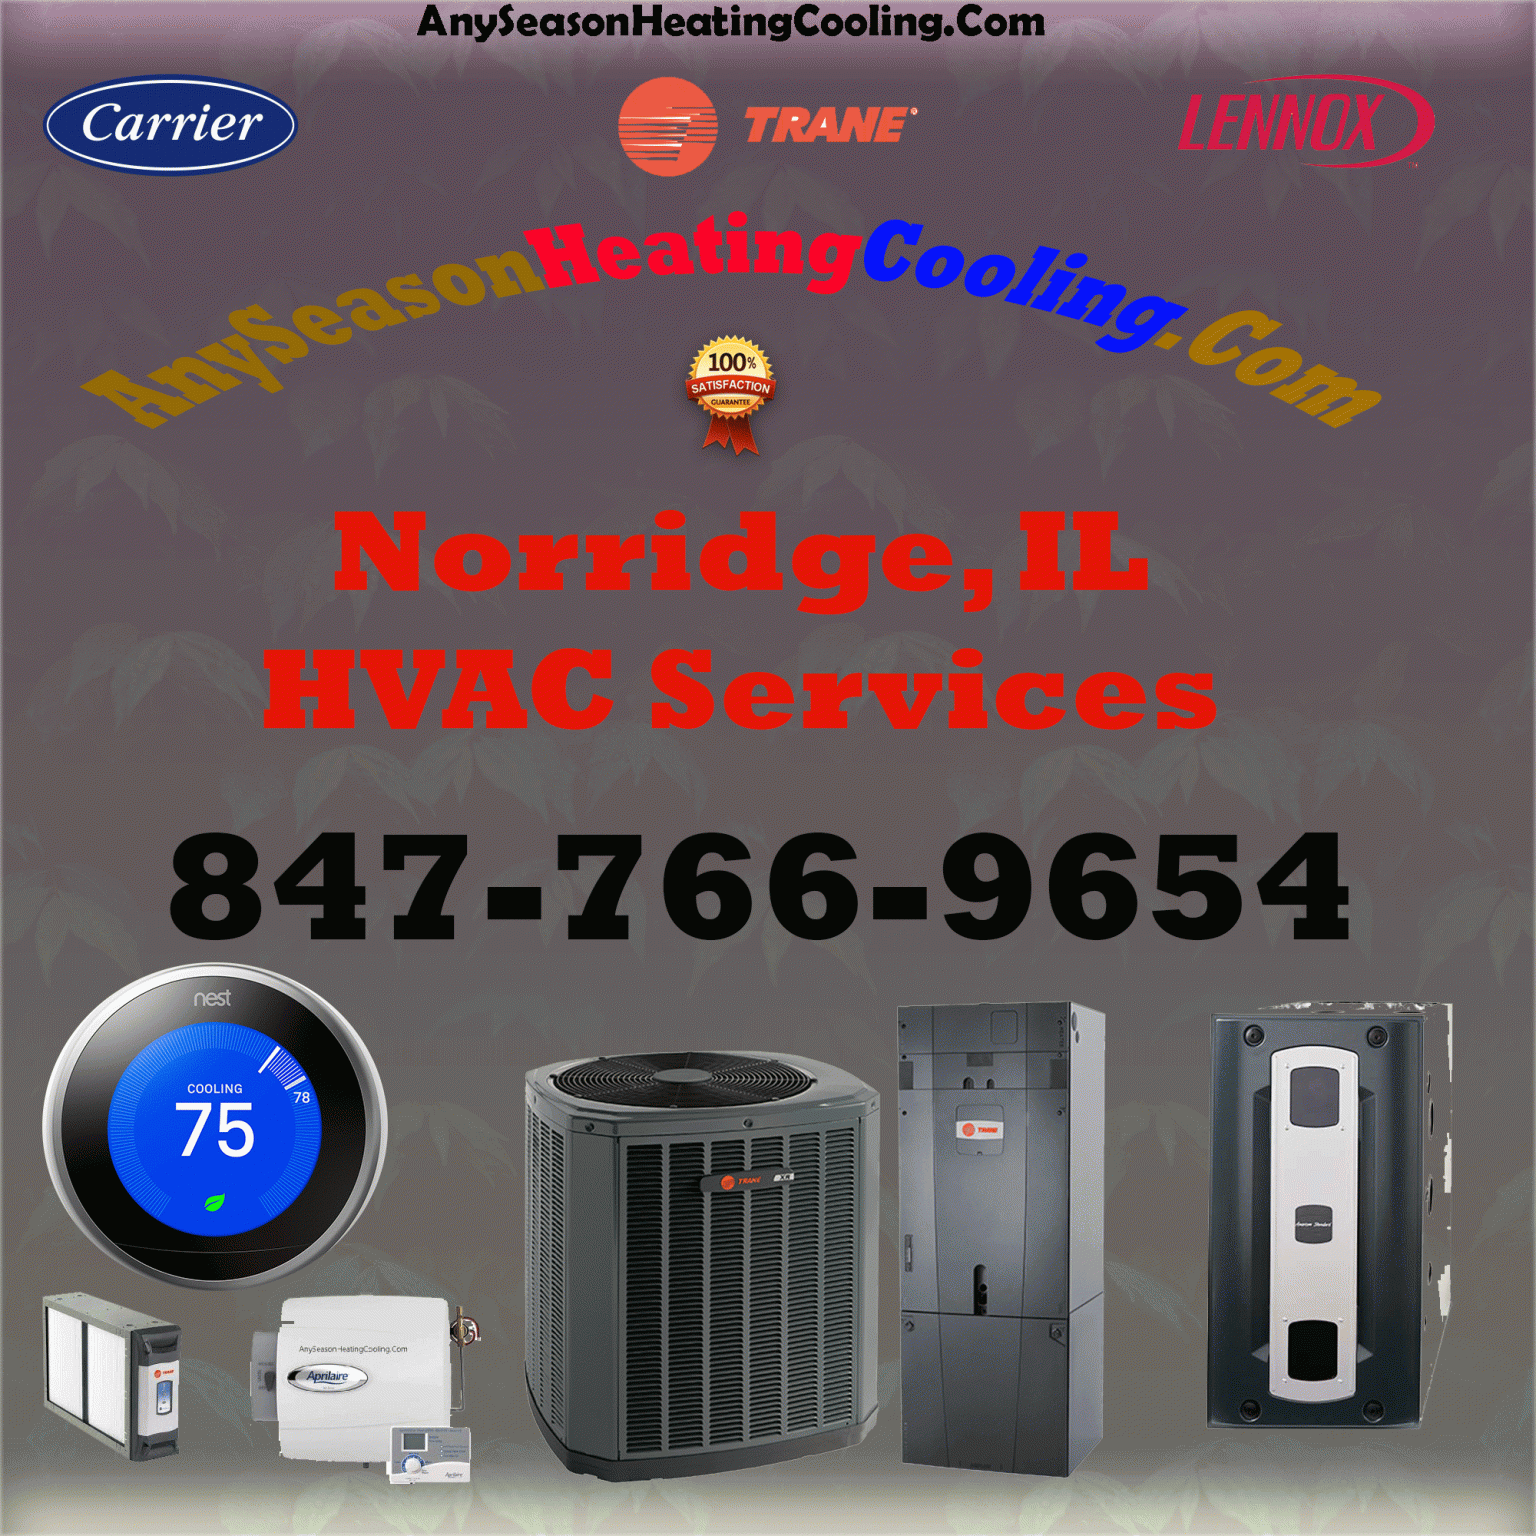 Norridge IL Furnace Replacement for Less